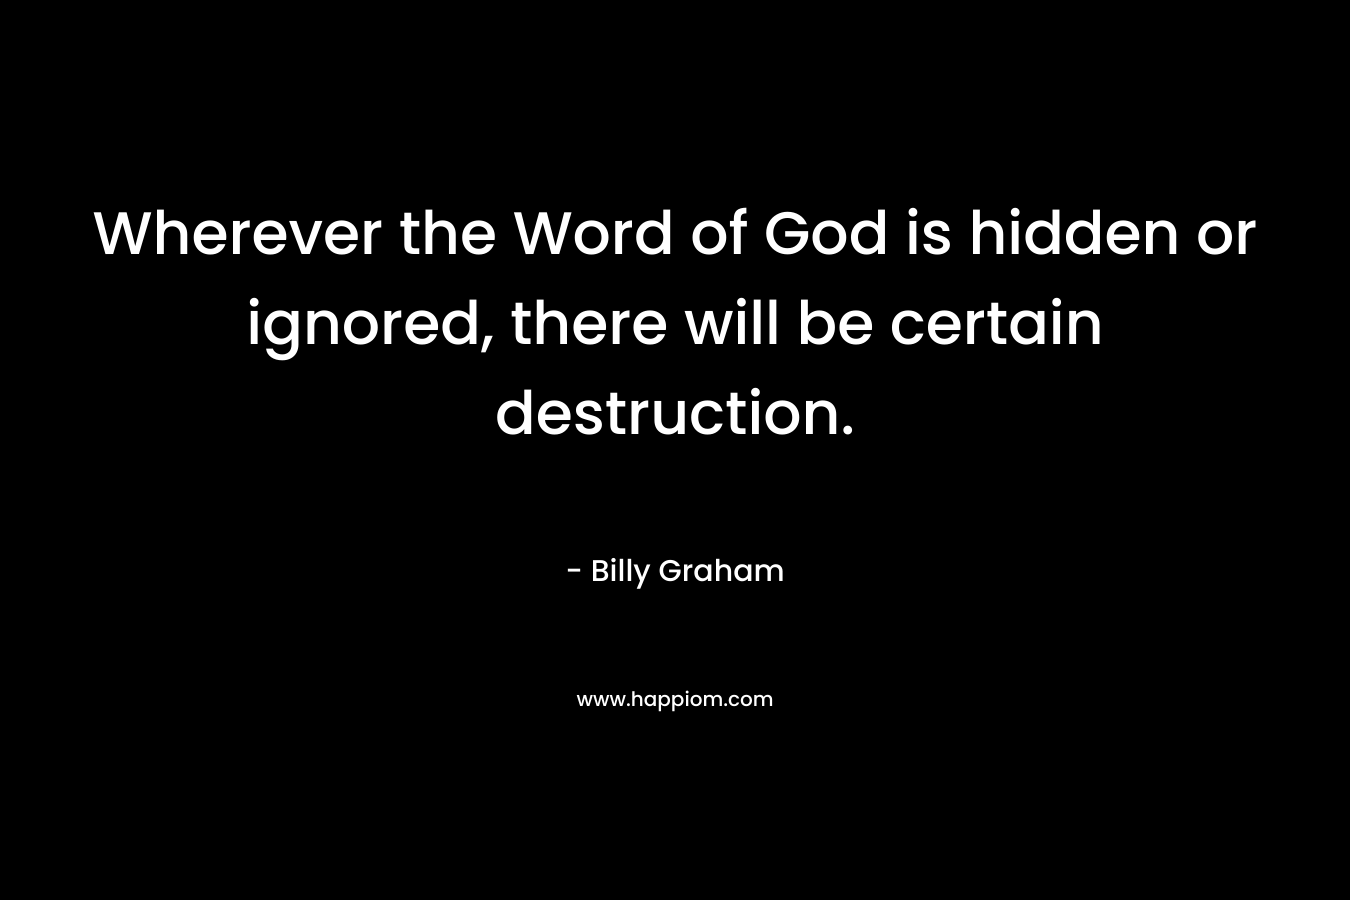 Wherever the Word of God is hidden or ignored, there will be certain destruction. – Billy Graham